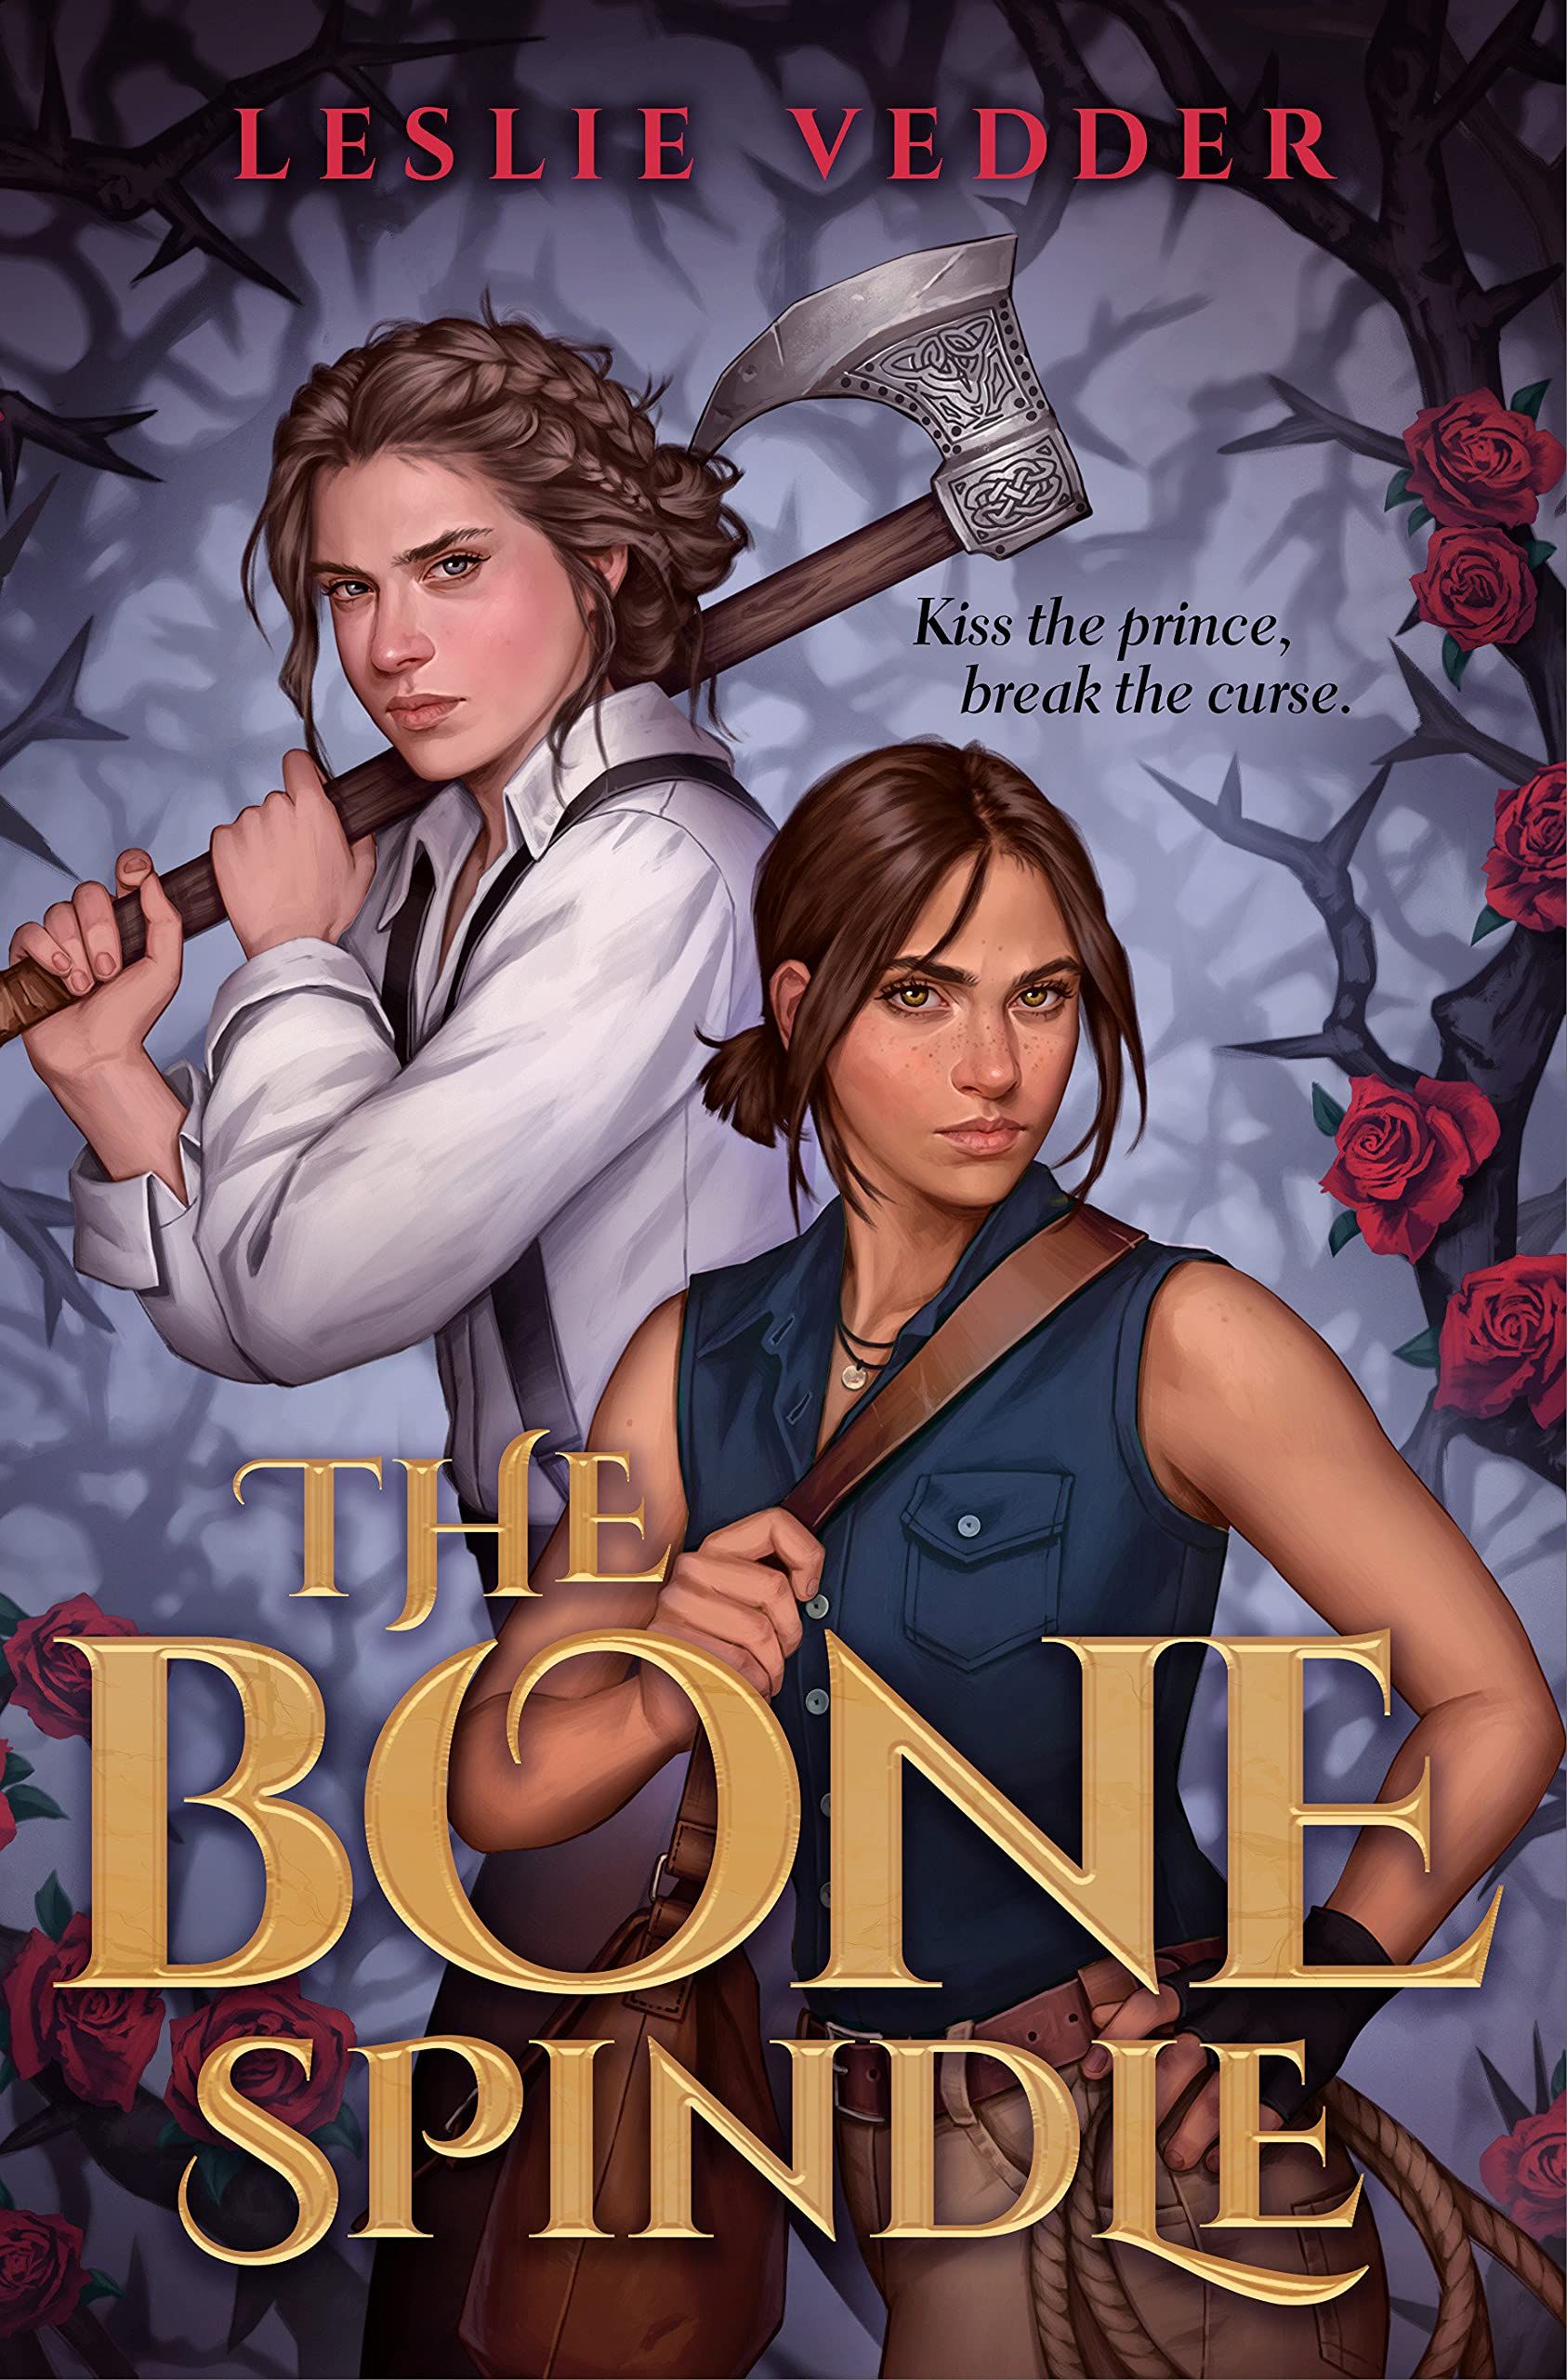 Cover image for "The Bone Spindle" by Leslie Vedder